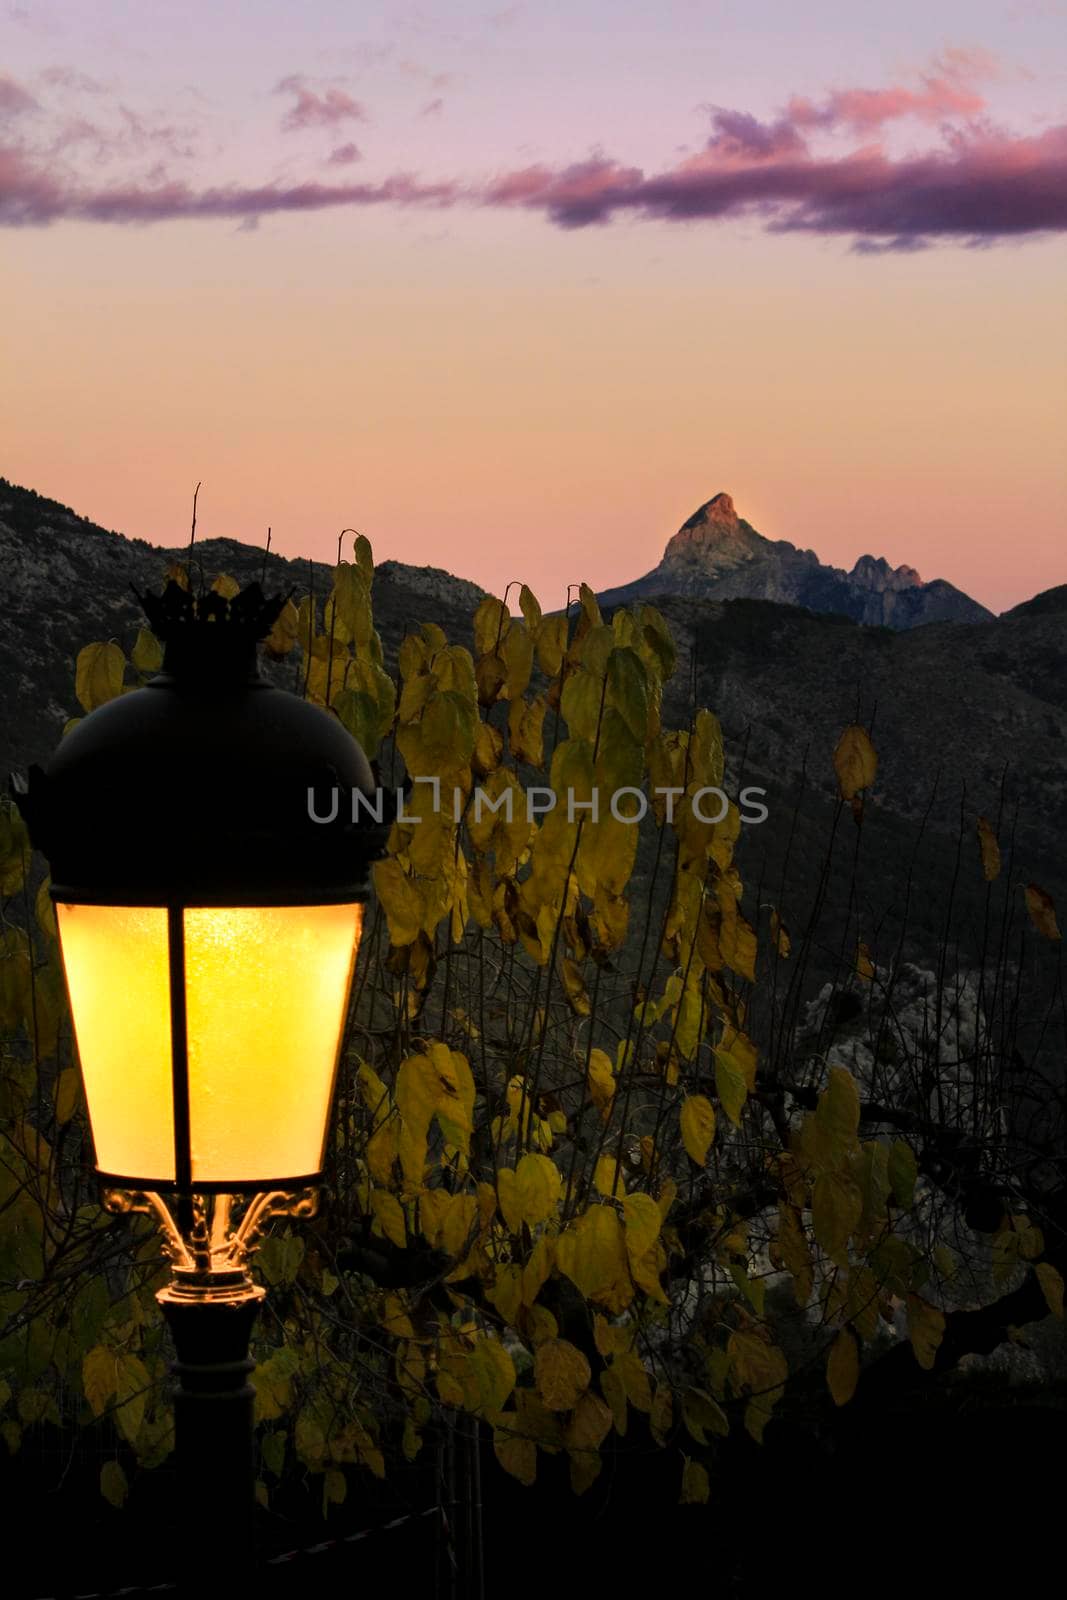 Sunset in Guadalest village with beautiful view of the valley. Vintage lamppost in the foreground.